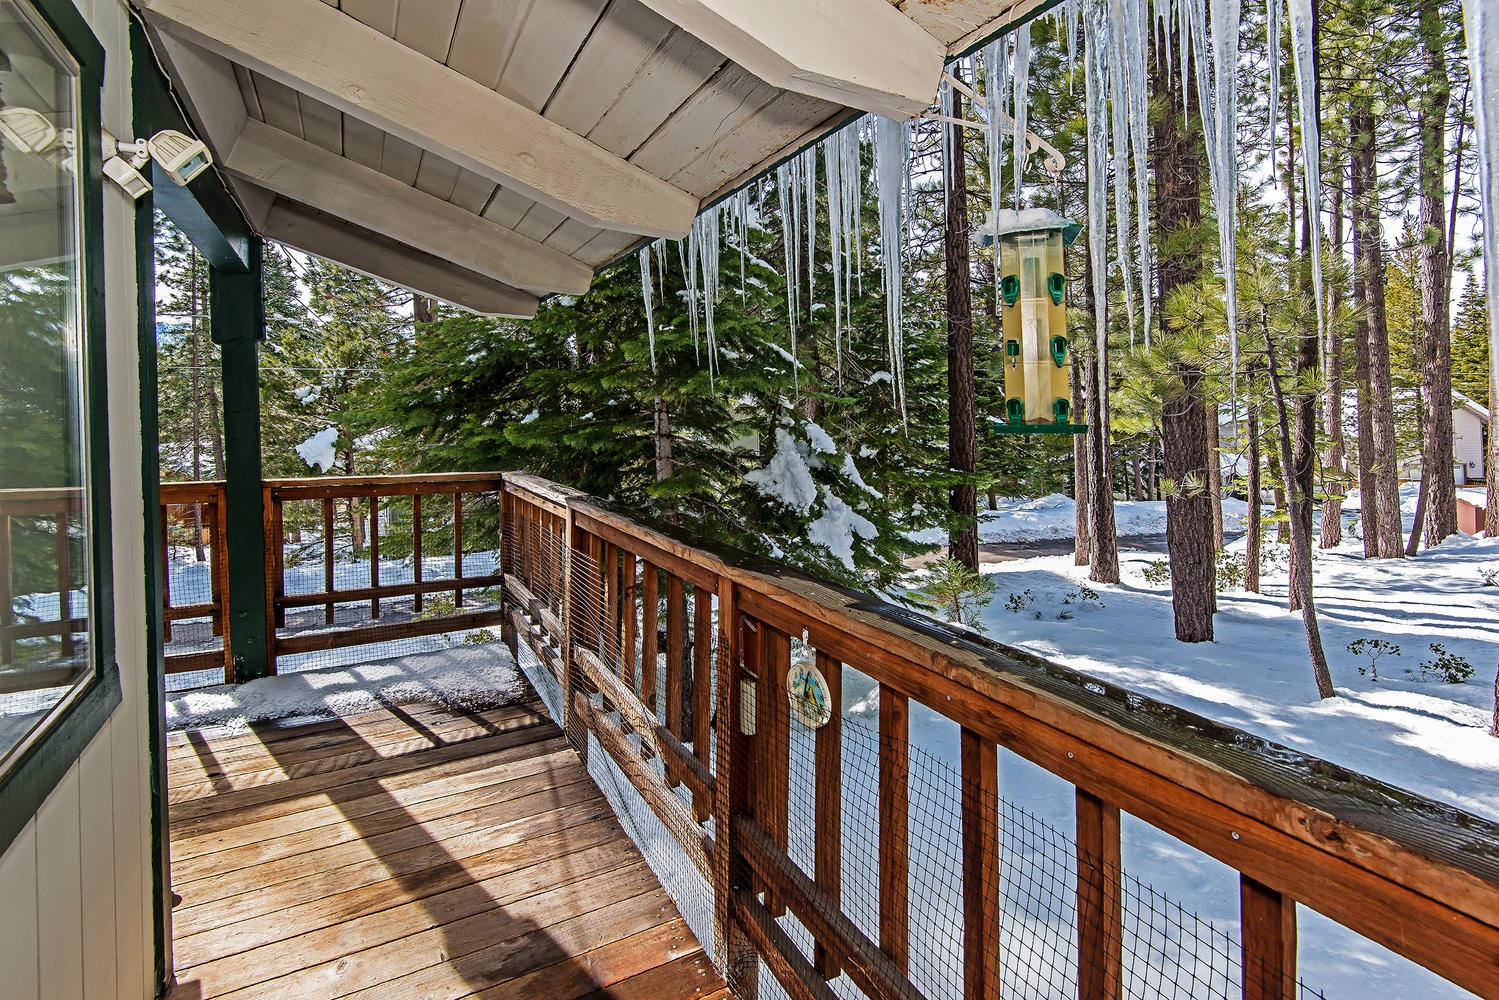 Covered balcony with forest view